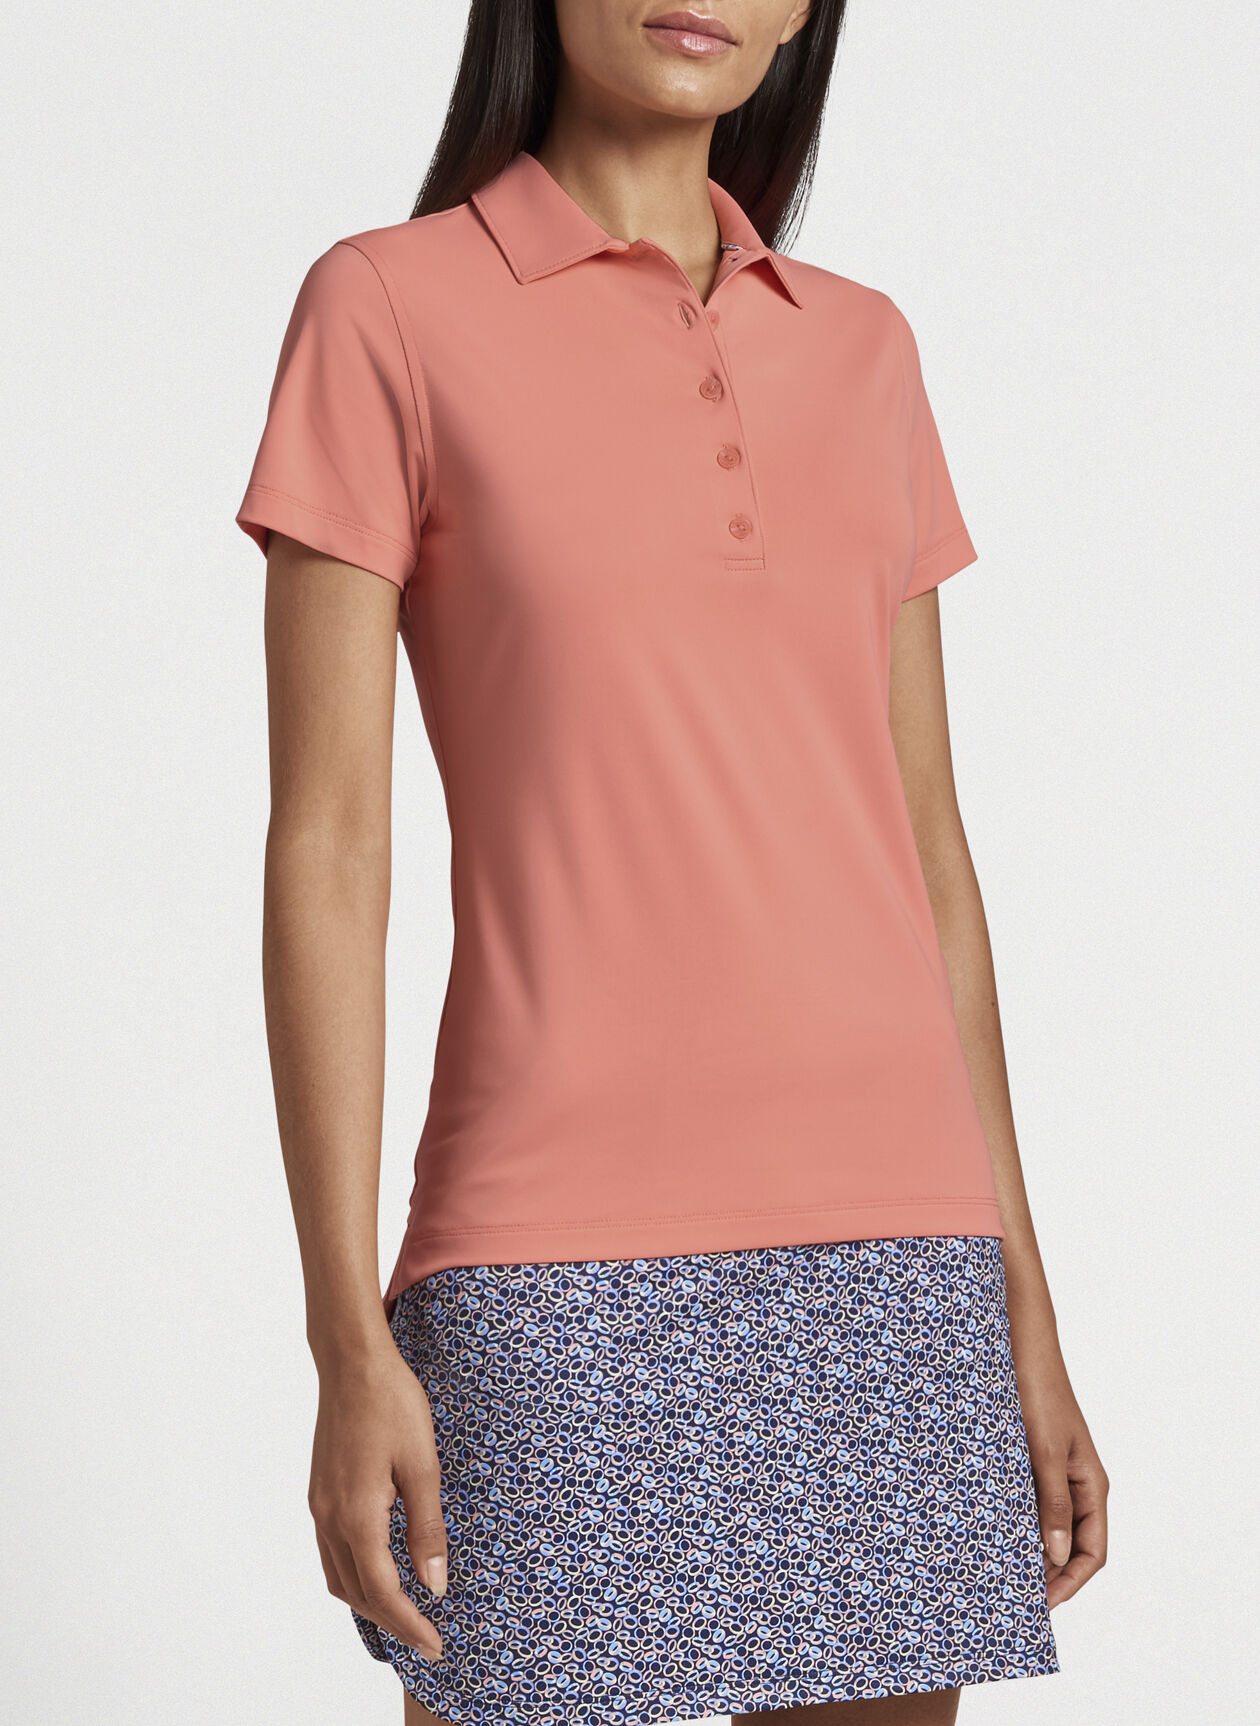 Perfect Fit Performance Polo| Peter Millar